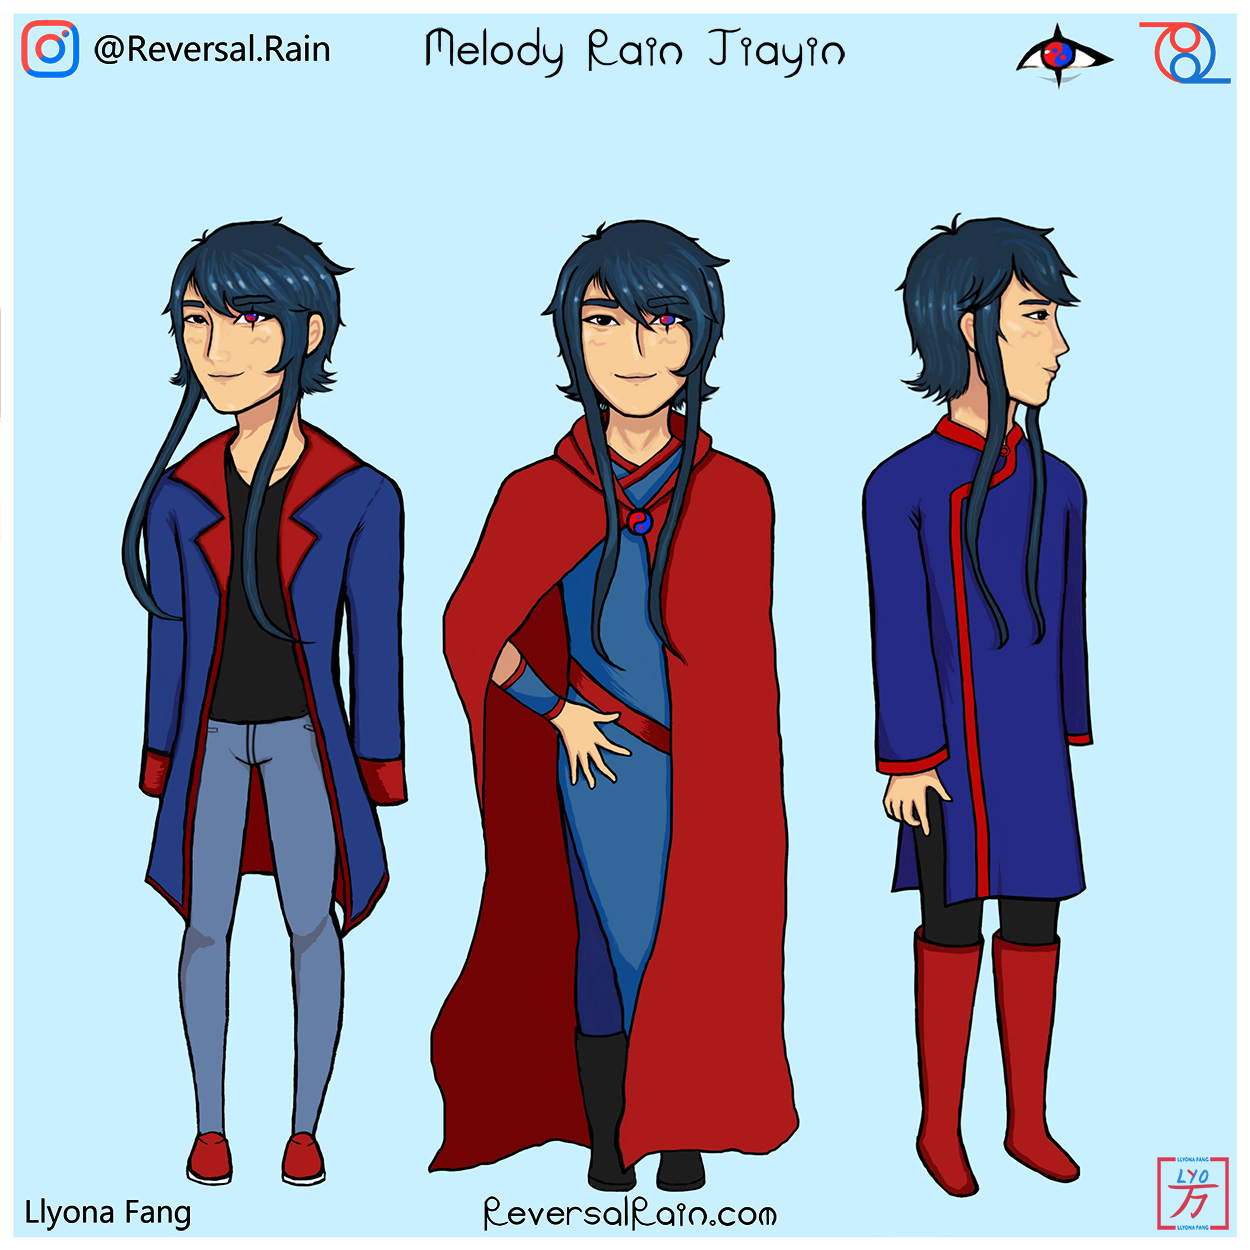 <p><h4>💙🌧️ Melody Rain Jiayin 🌧️💙</h4></p>
              <p>An artist, musician, and mechanic in training!</p>
              <p>🎶 Instrument: Piano</p>
                <p>The oldest child of the village mechanic has a strong fascination with science and arts and loves to explore the world around them.
                  You might find them looking up at the rain, climbing up a tree to sketch the sunset, or hear the faint harmony of piano music in the
                  distance when they’re in a creative mood. They may or may not be the perpetrator responsible for vandalizing the understory's trees
                  with various carving patterns. Like many others, they fear the darkness below the understory and its deep waters, but you'd have to
                  give them some credit for helping their father maintain the paddles that churn the ocean's surface. Be wary, they might throw you a
                  clever prank or sneak some notes out of your woodwind instruments while your attention is elsewhere.
                <p><p>
                <p>» <i>Click to exit description!</i> «</p>
              </p>
                